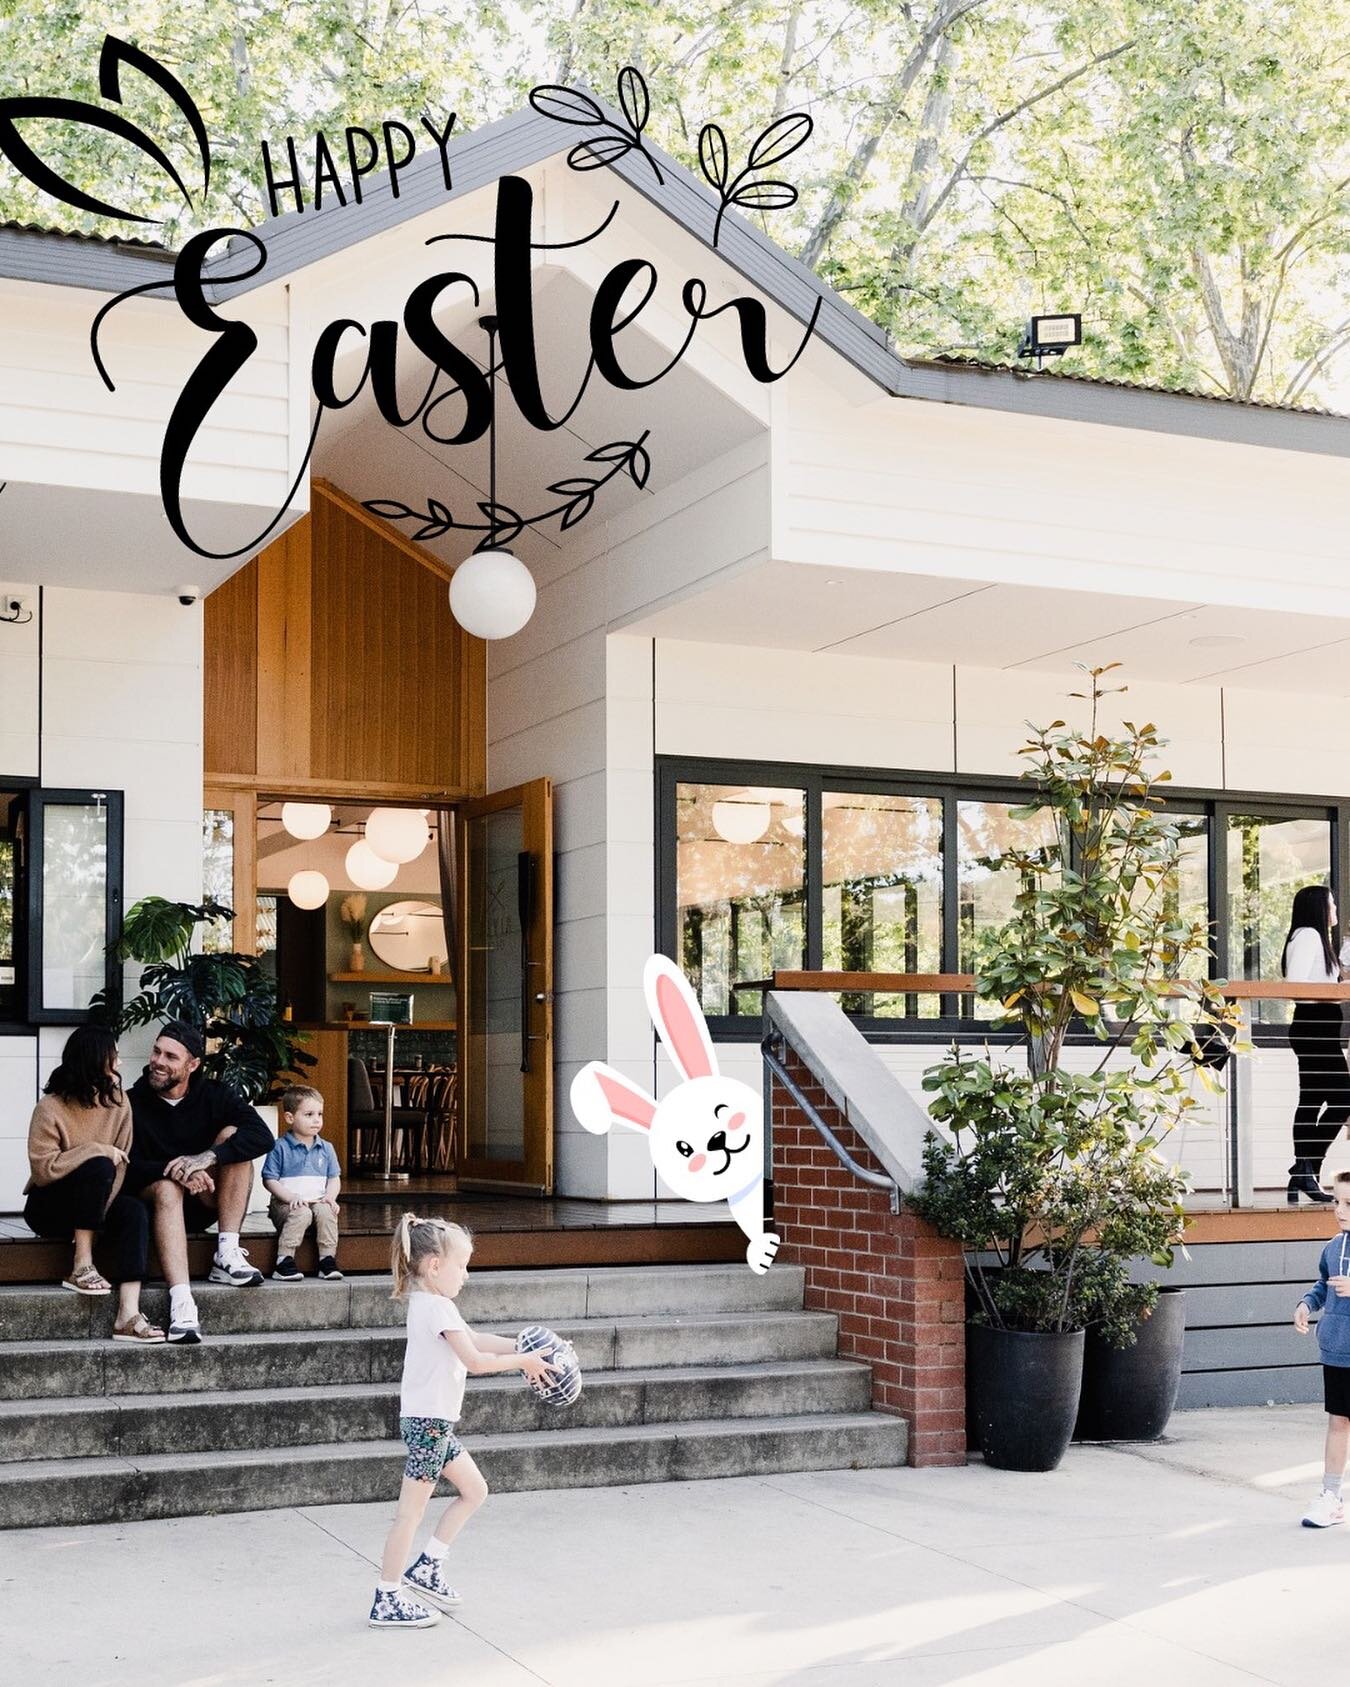 Happy Easter from The River Deck Team! 

Wishing you all a wonderful and safe Easter celebration with your loved ones. 

We are all having a rest today but we&rsquo;ll be back on board tomorrow. 

Save some room for a meal with us on Easter Monday!